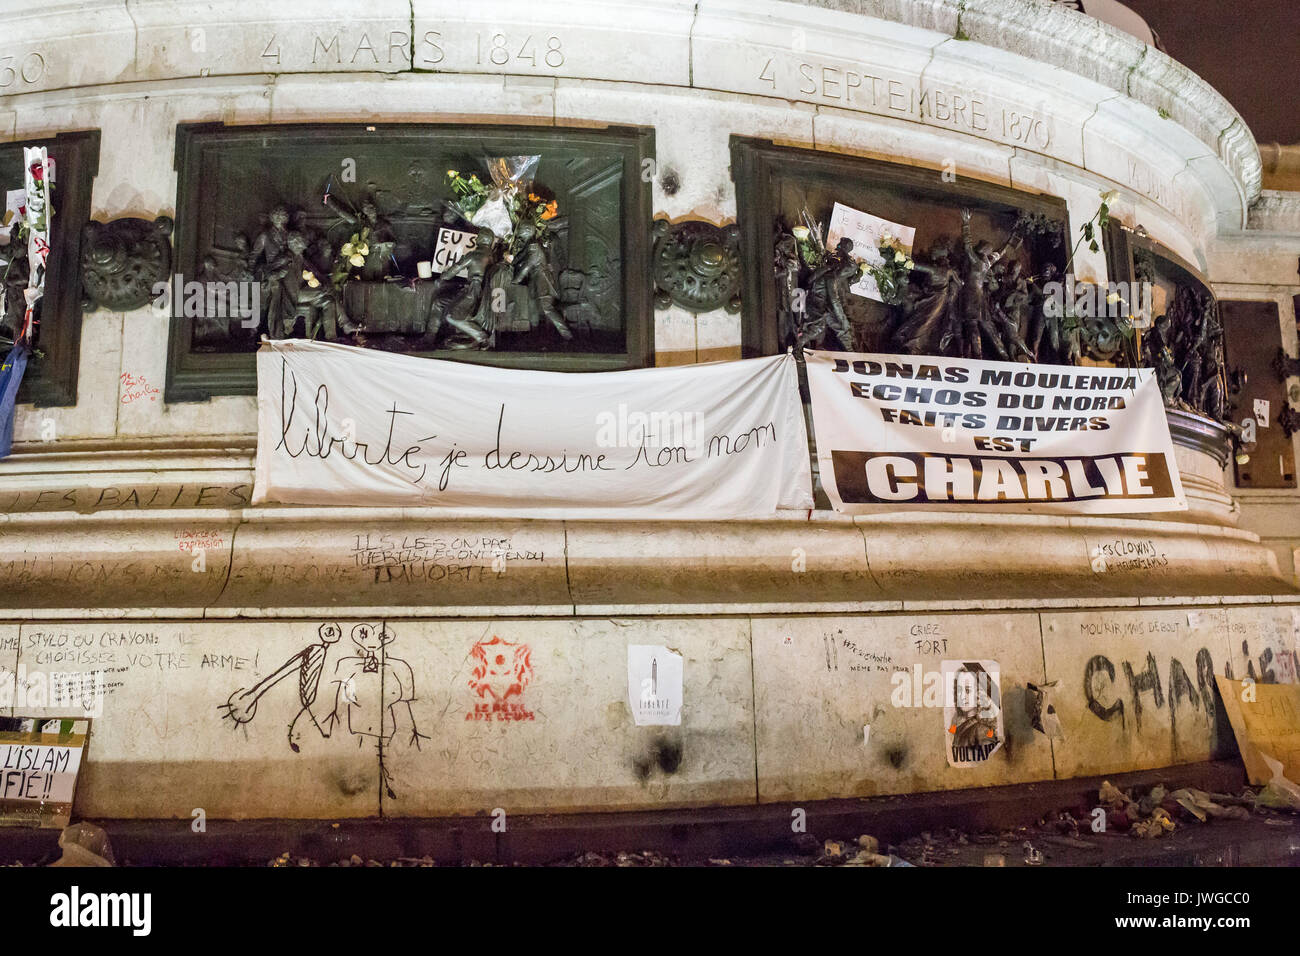 Banner liberté je dessine ton nom. Homage at the victims of Charlie hebdo killing in Paris the 7th of january 2015. Stock Photo